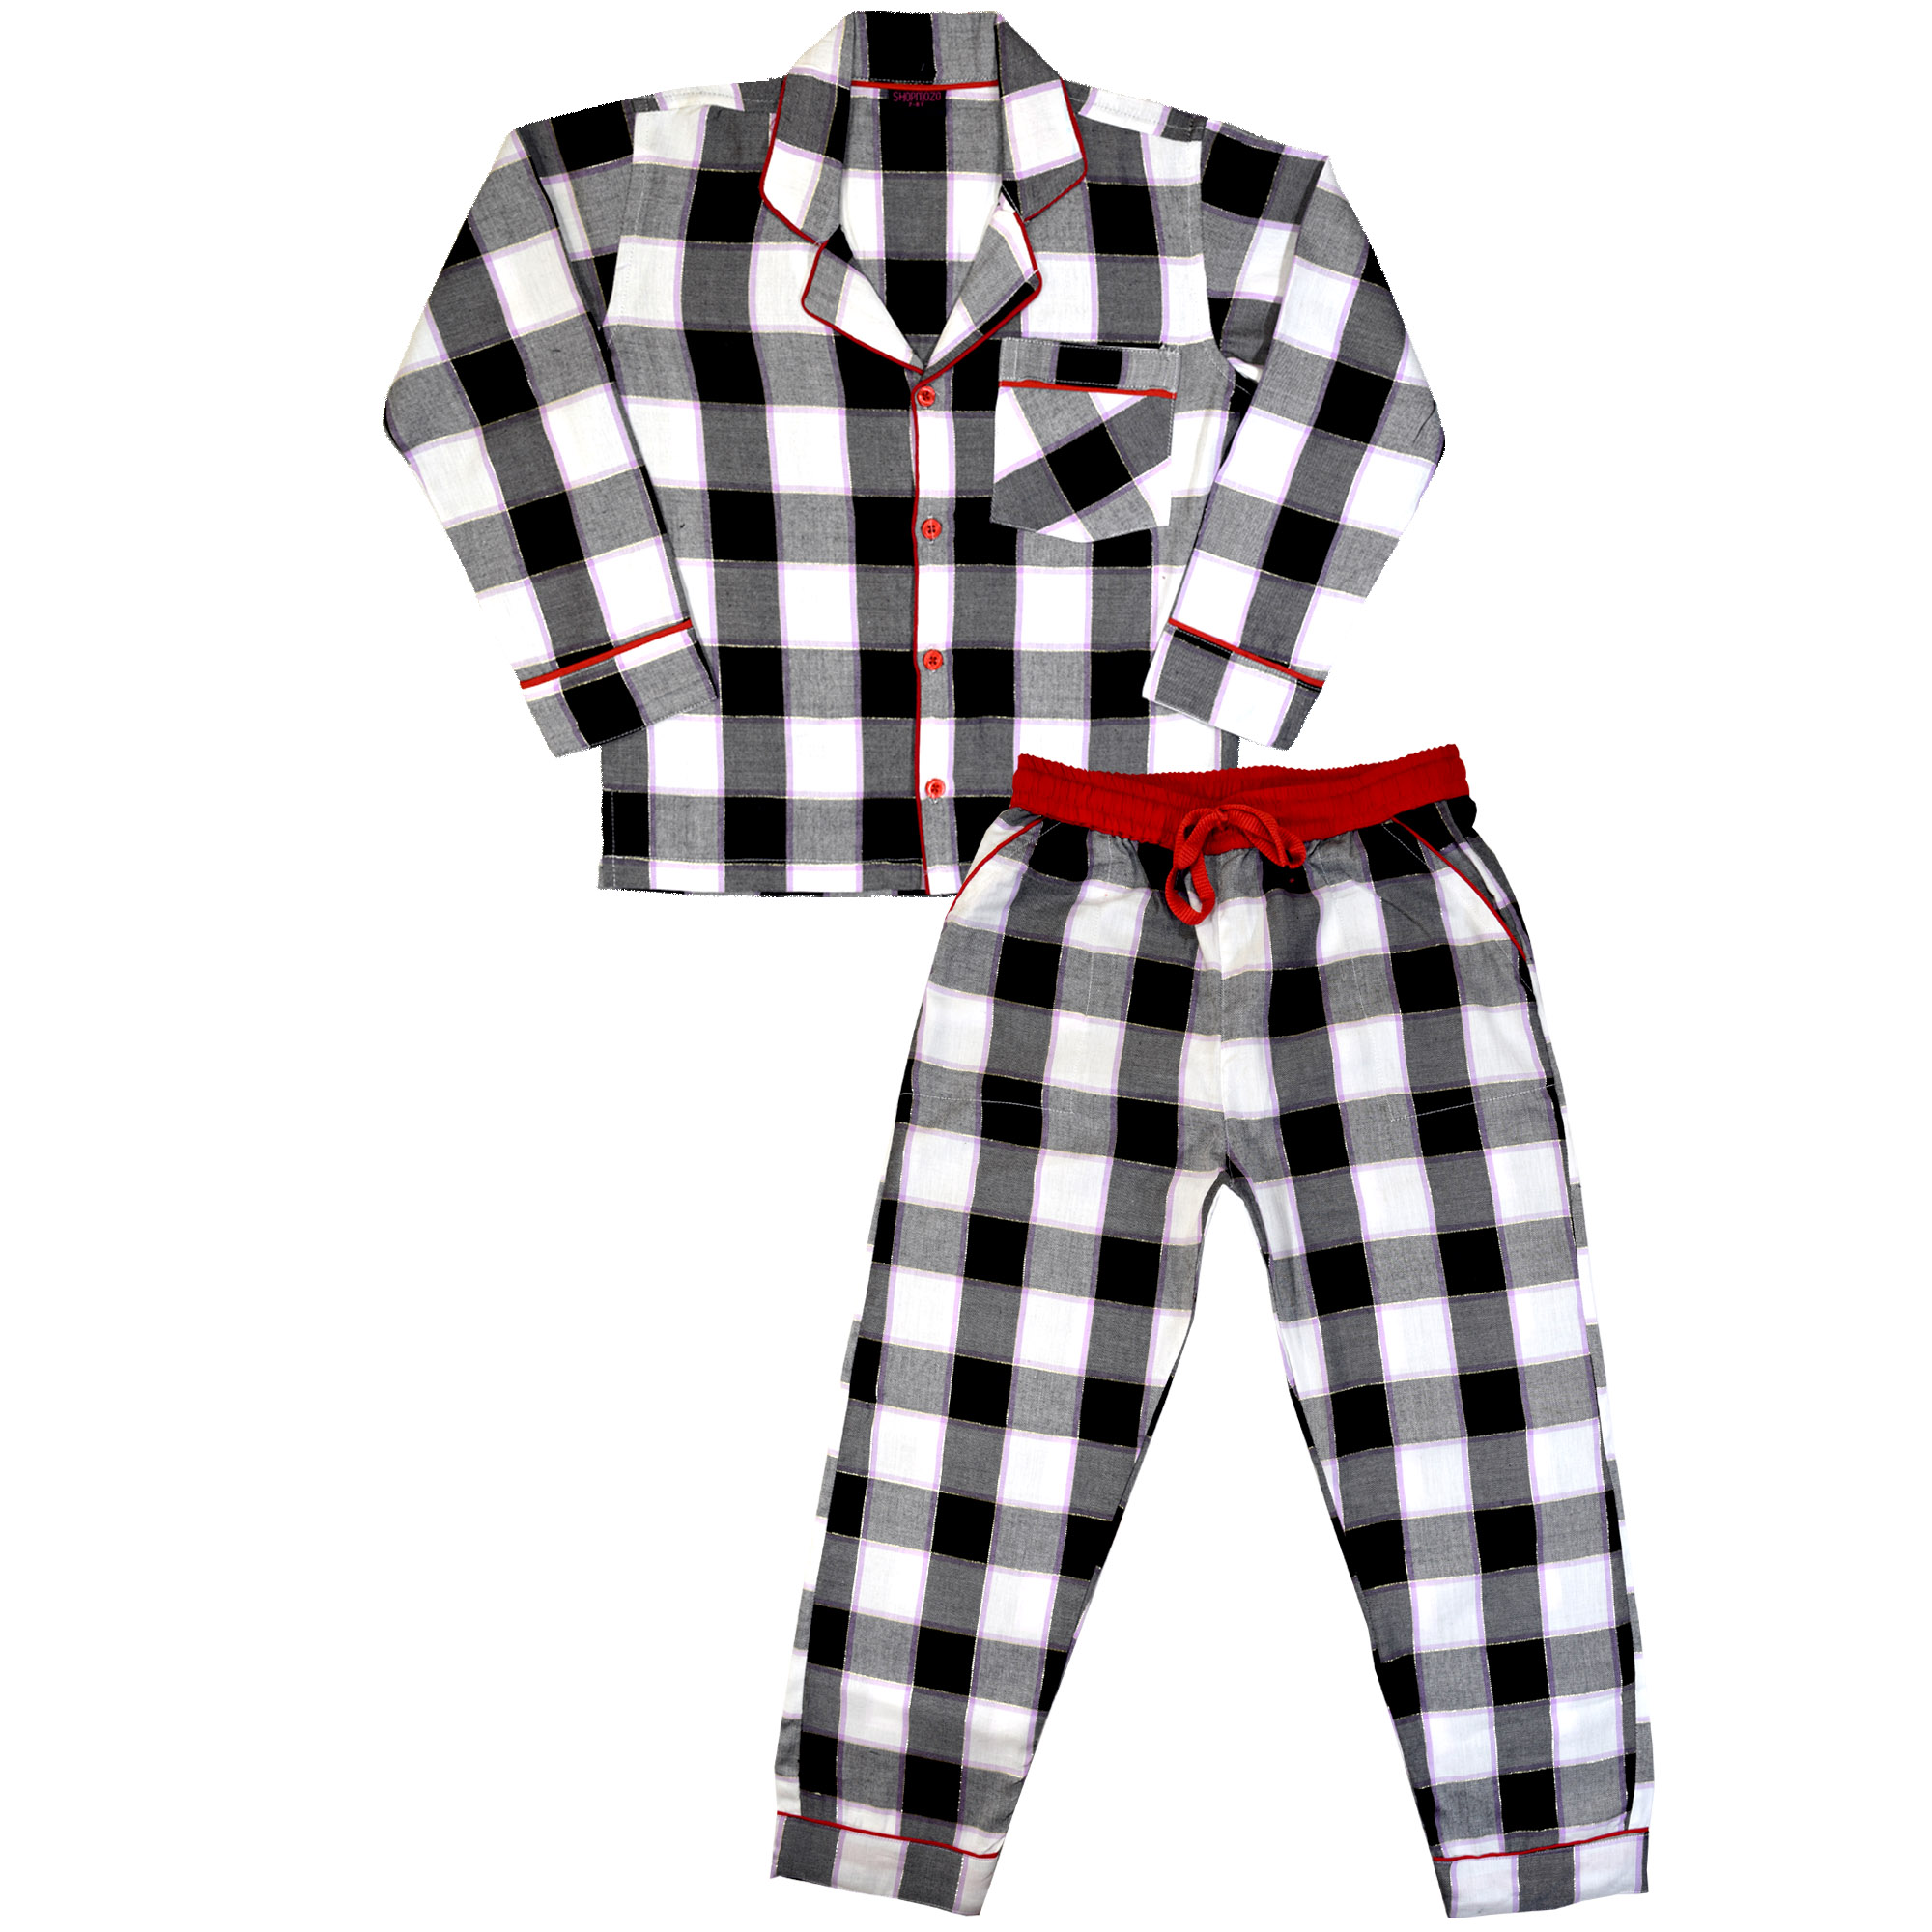 Sky blue and Prussian blue checkered women nightsuit set – Vanusher Clothing